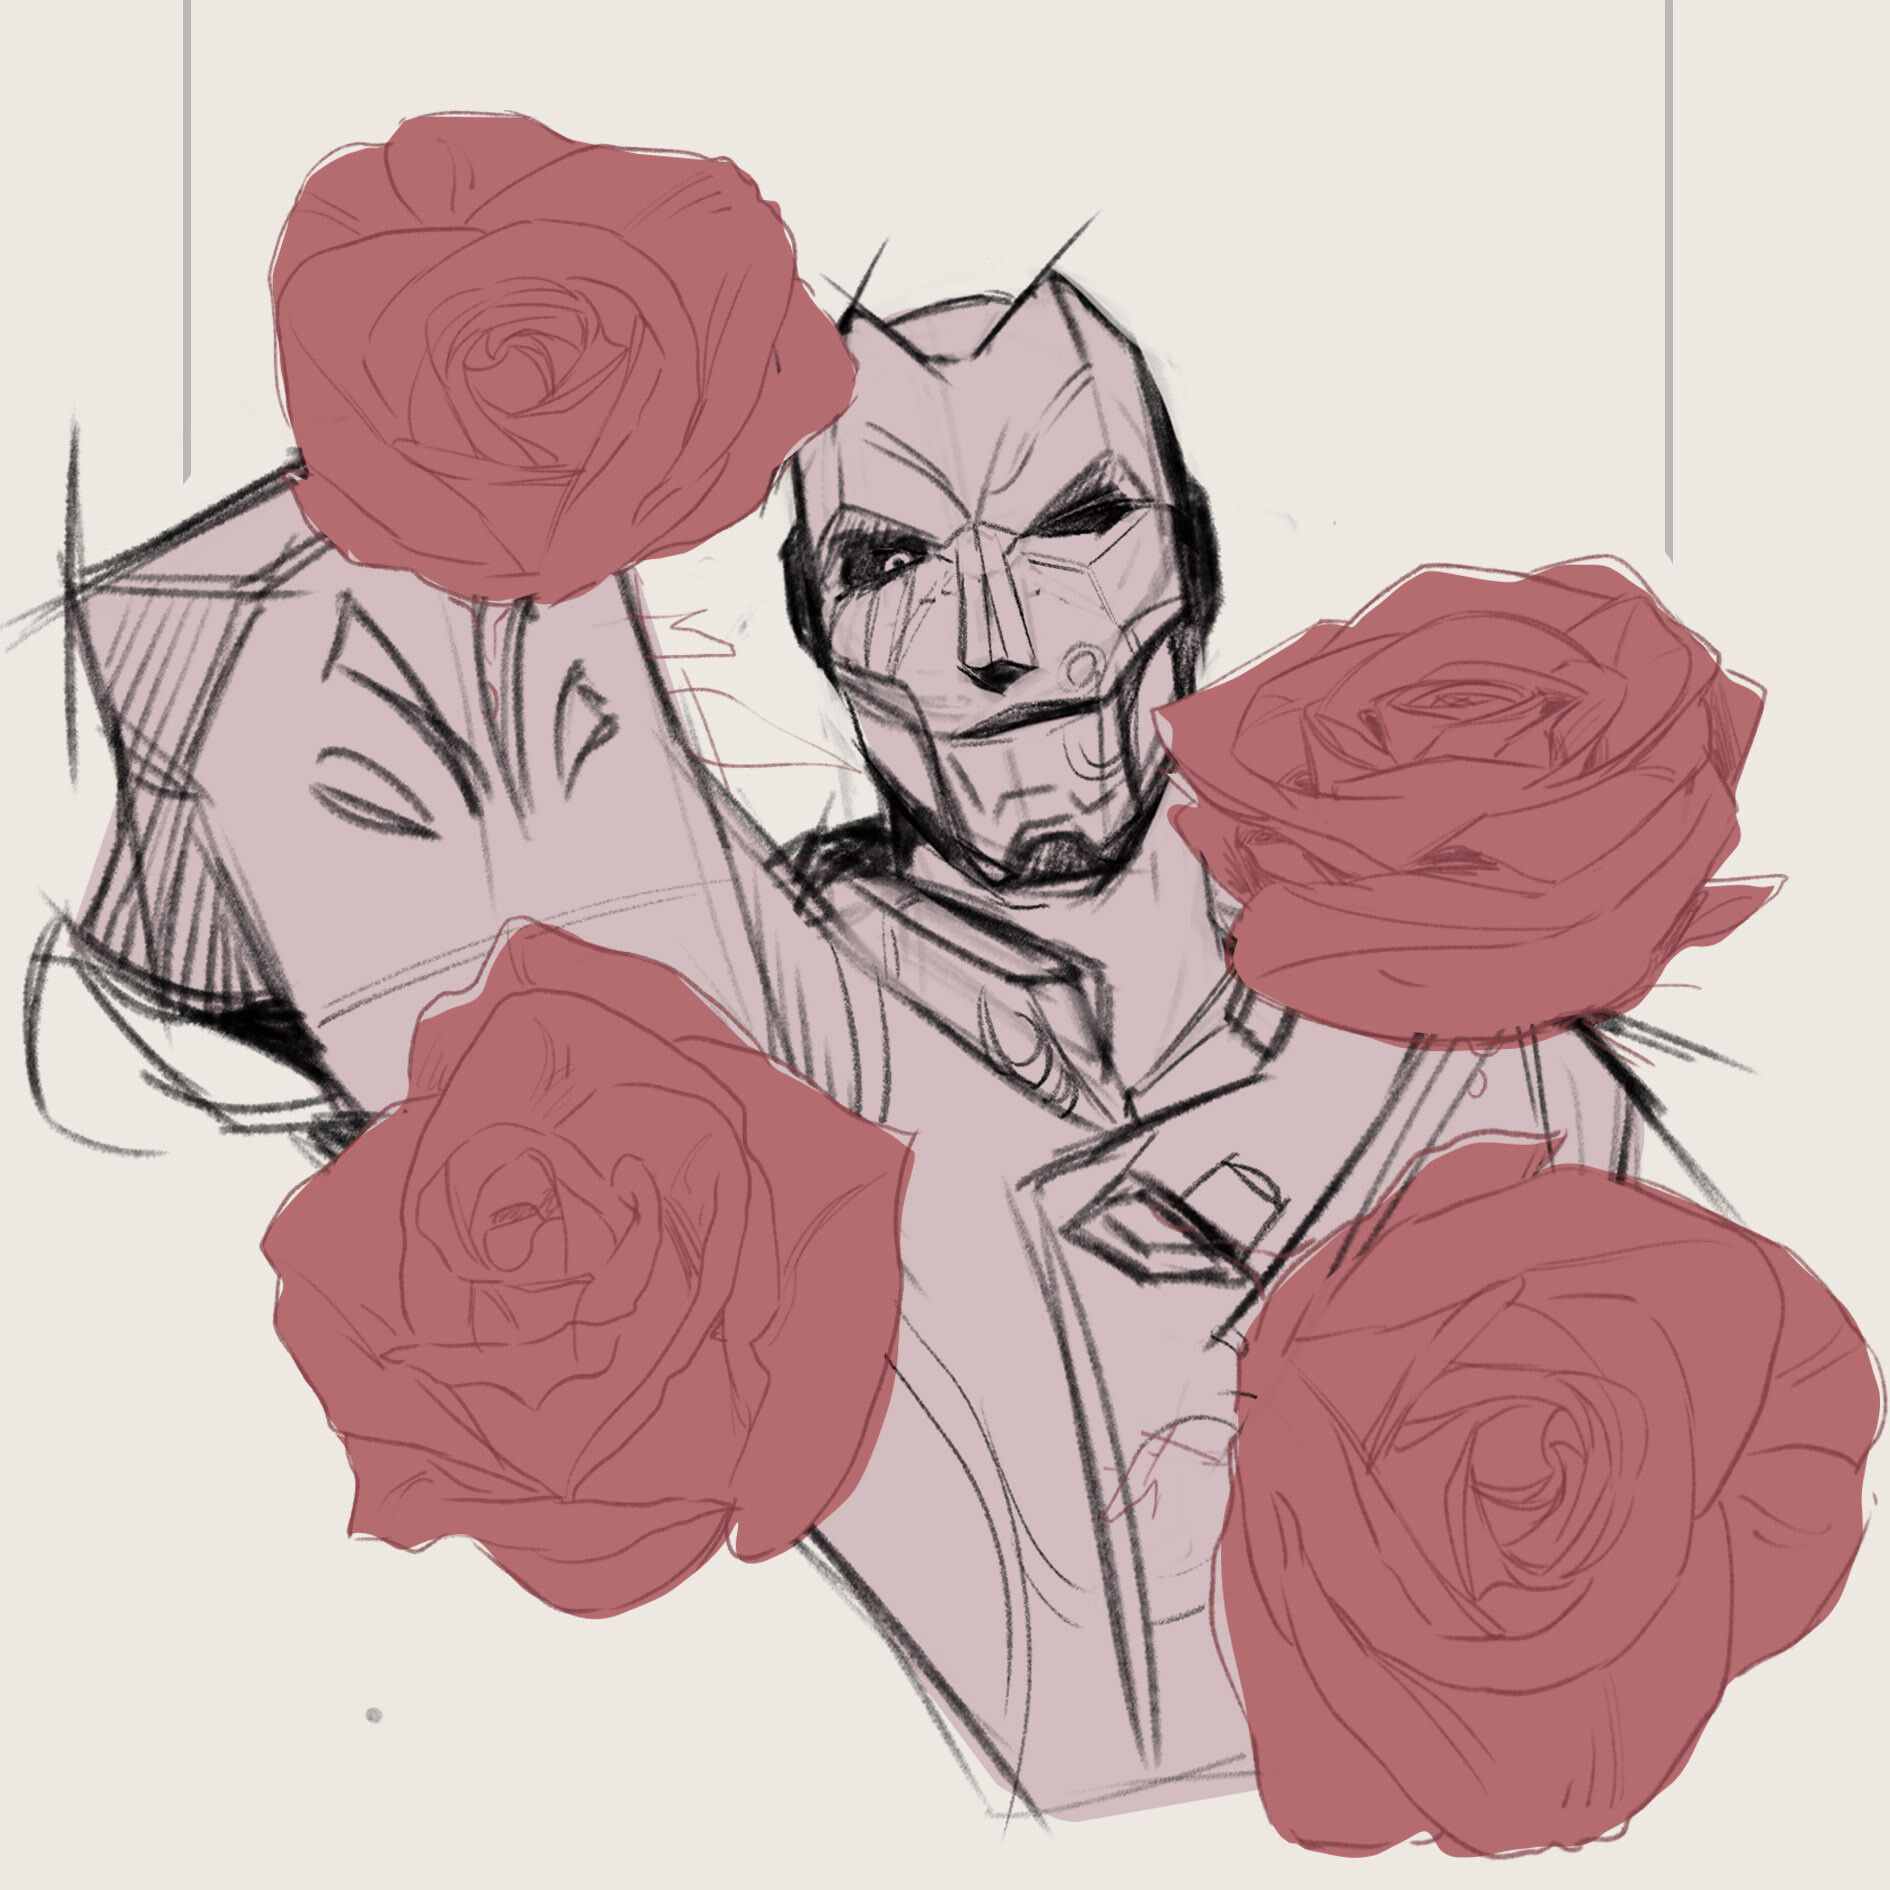 scp 049 and scp 035 holding roses | Sticker